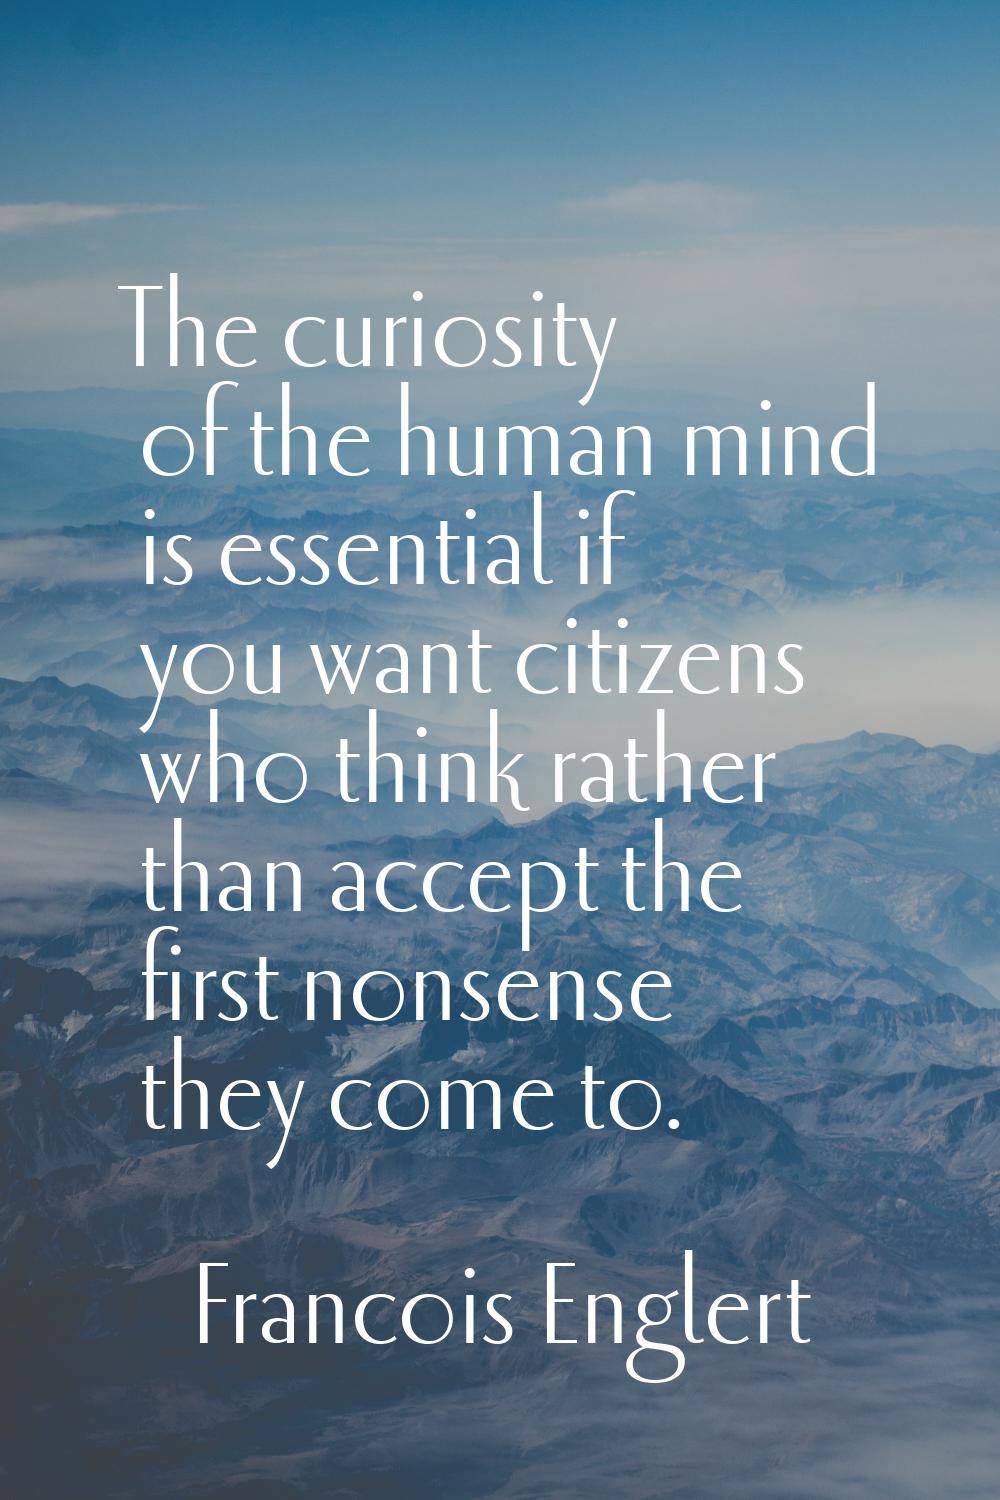 The curiosity of the human mind is essential if you want citizens who think rather than accept the 